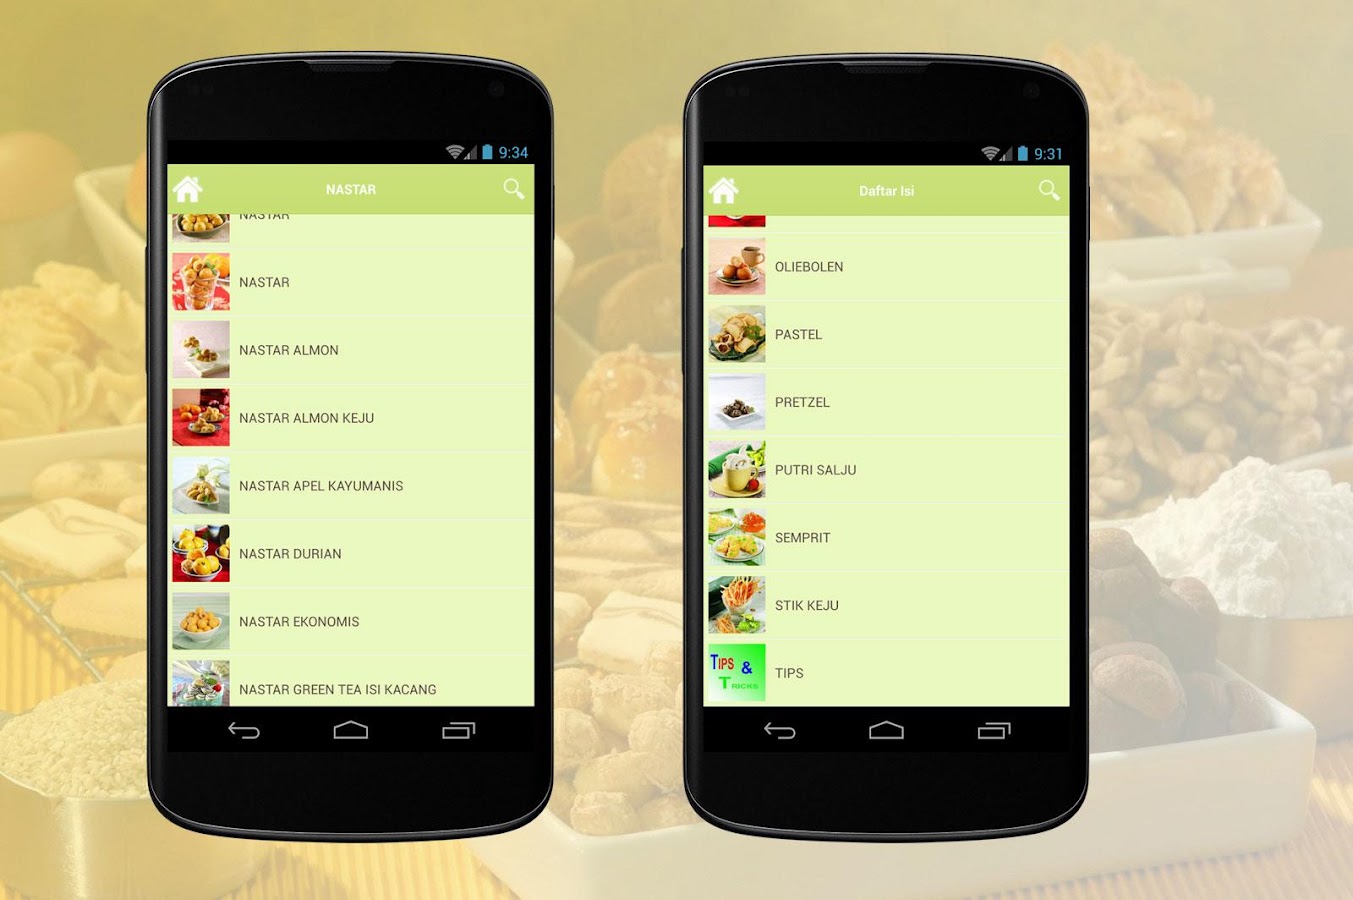 RESEP KUE KERING - Android Apps on Google Play